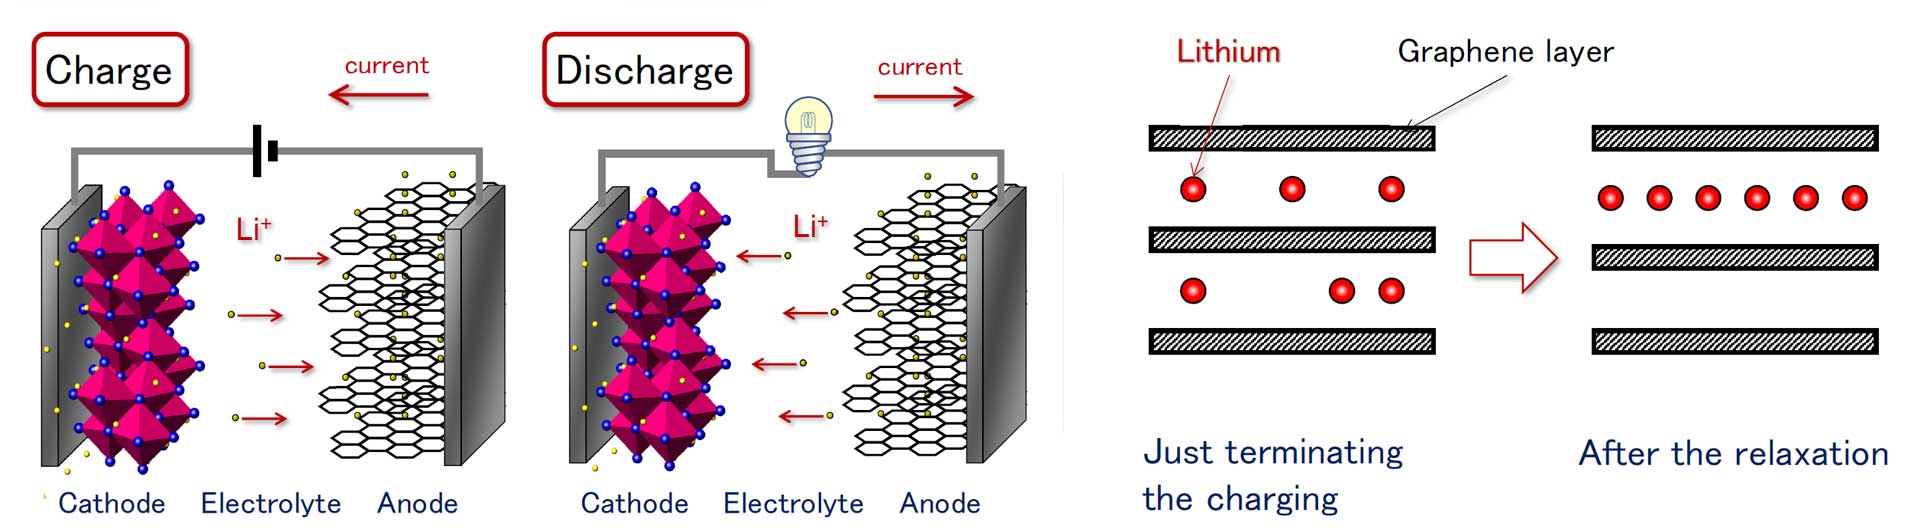 Schematic diagrams of lithium-ion batteries (left) and the relaxation of graphite anode